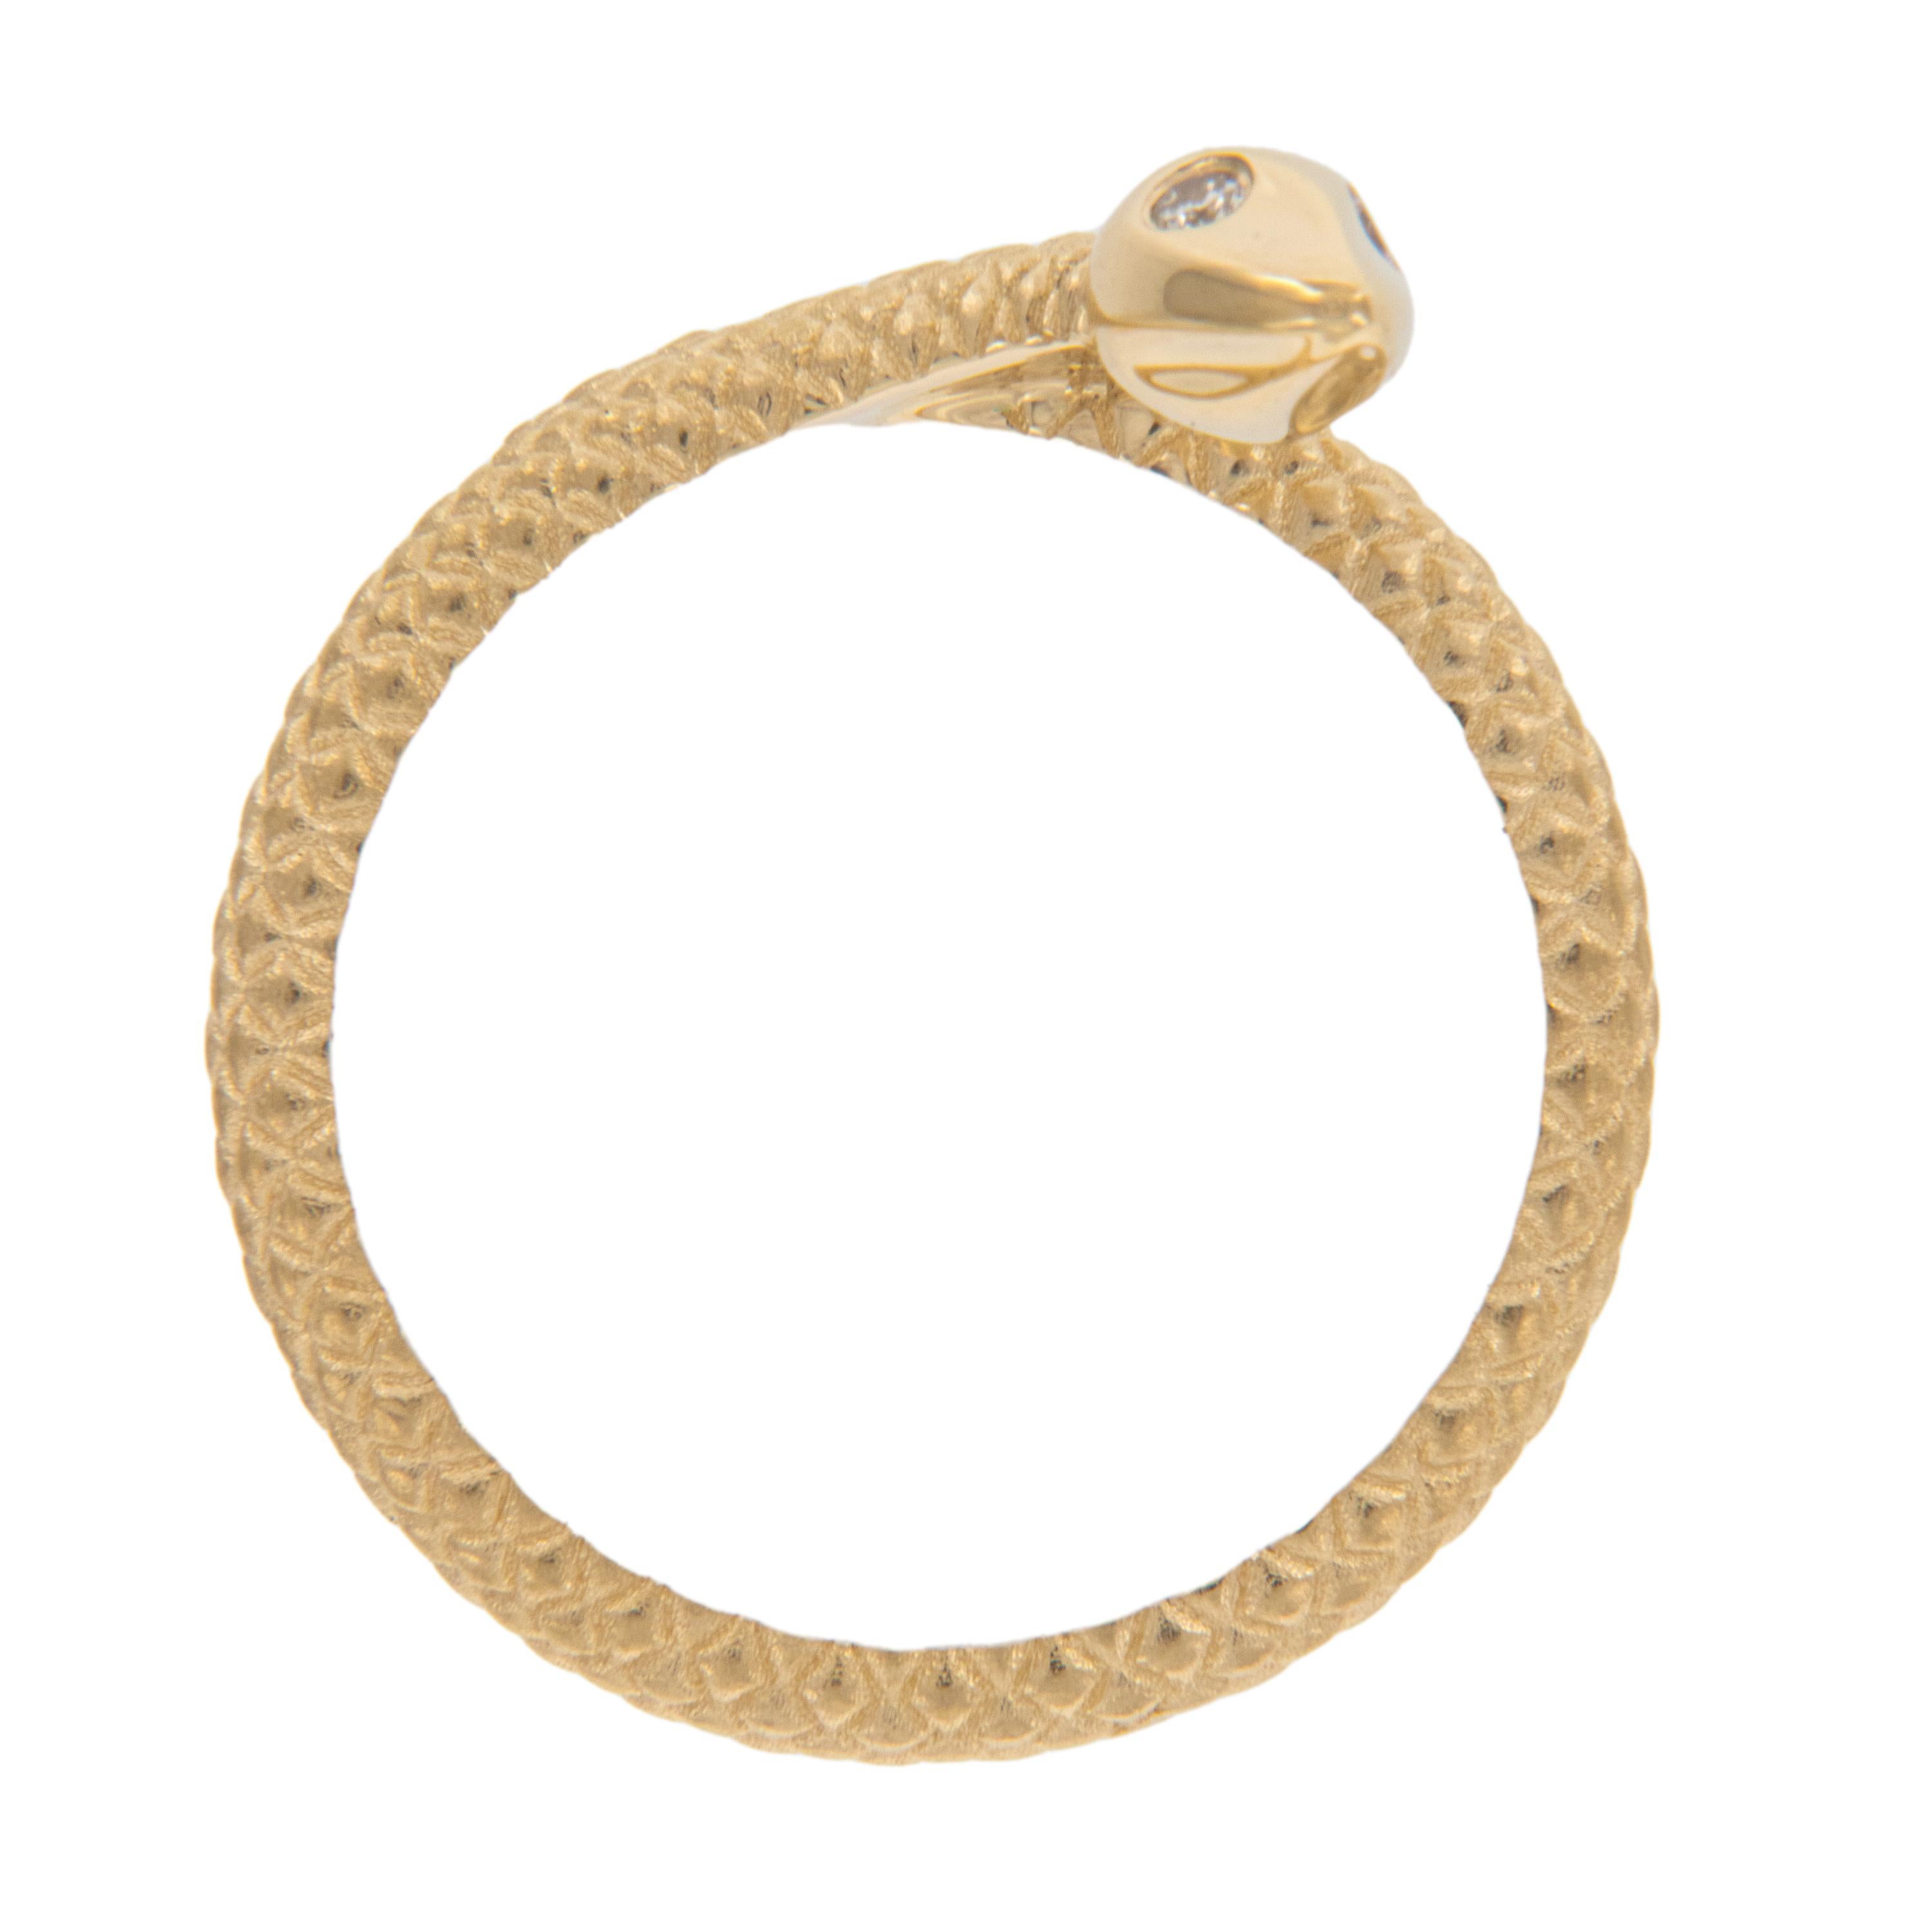 Snake symbolism has been used in jewelry for ages; from Queen Cleopatra & beyond. With its duality in meanings its a perfect symbol for rebirth through their ability to shed its skin and start anew,  to desire and protection. This lovely textured